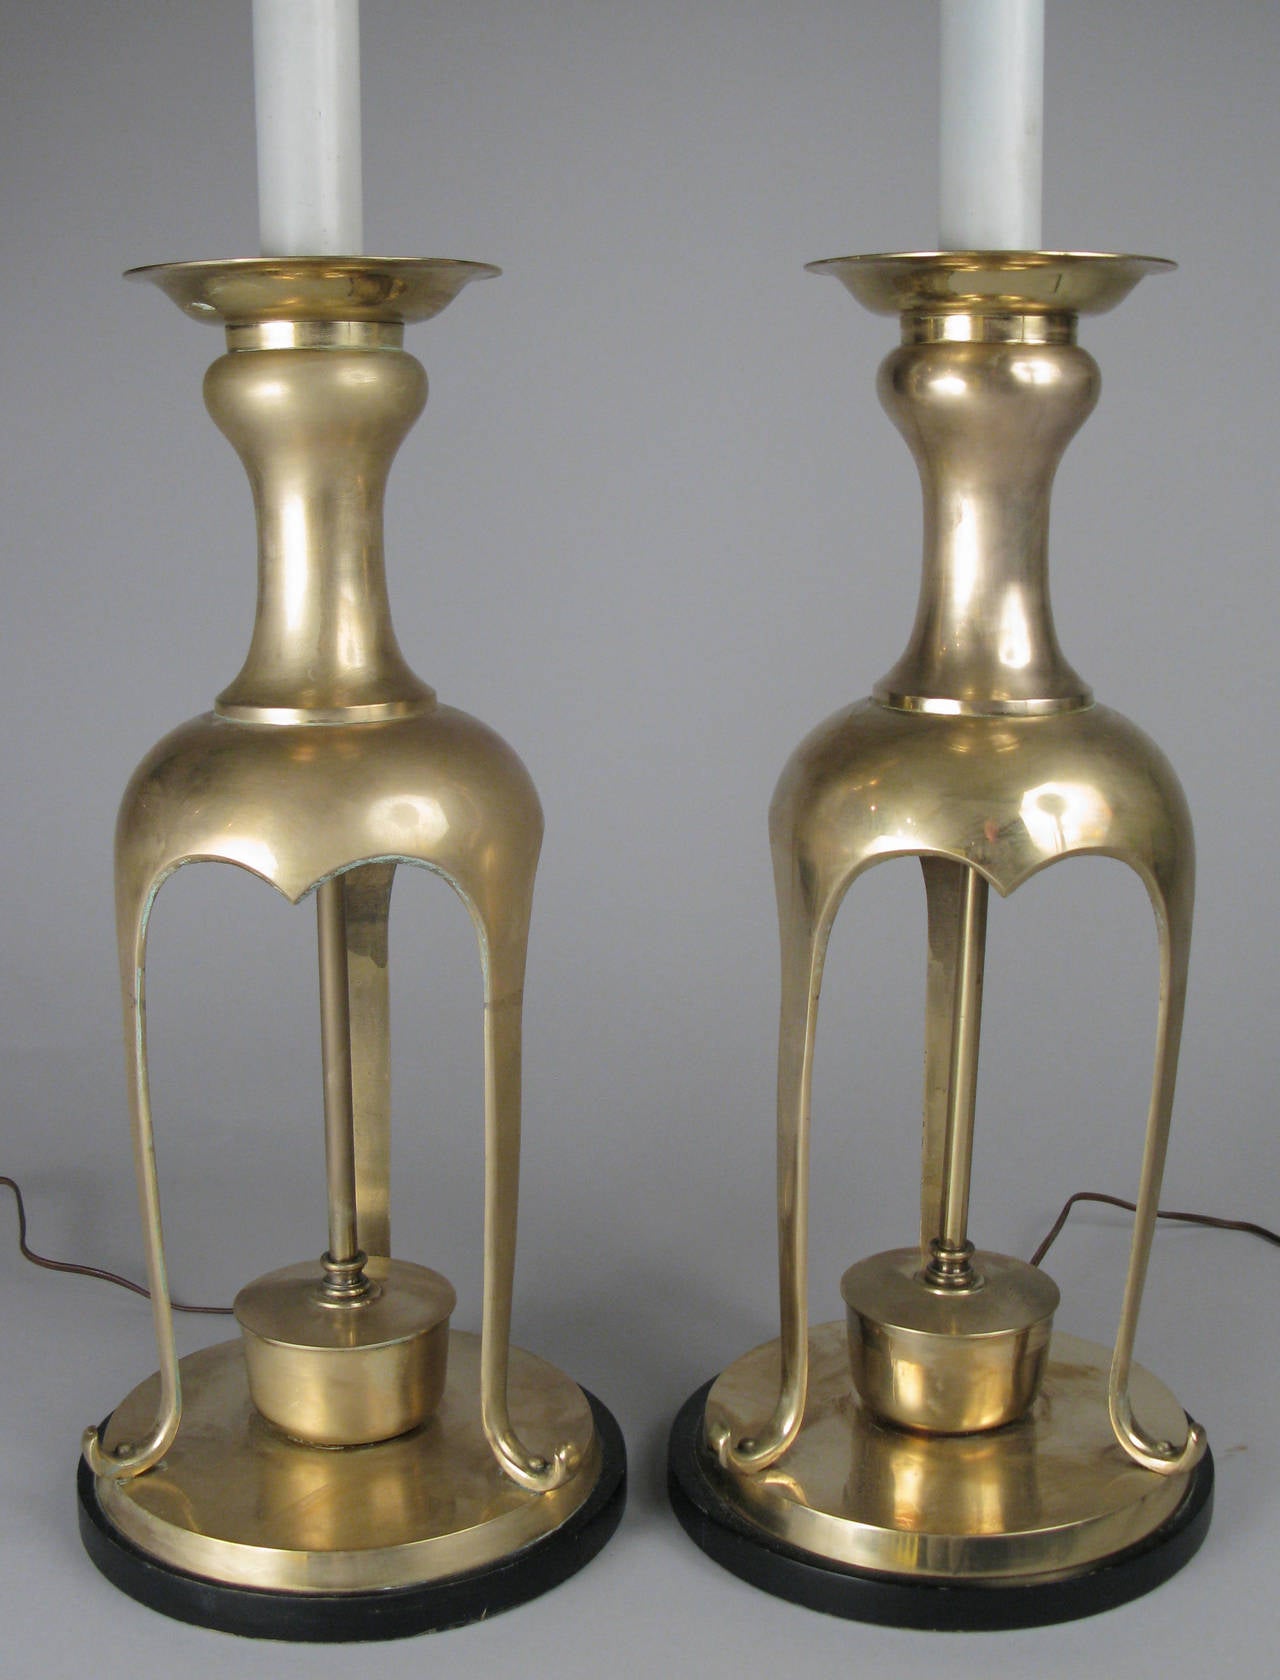 A very large-scale pair of 1960s Asian Modern altar stick lamps in solid brass, with lacquered wood stems and double sockets, with their original ring finials.